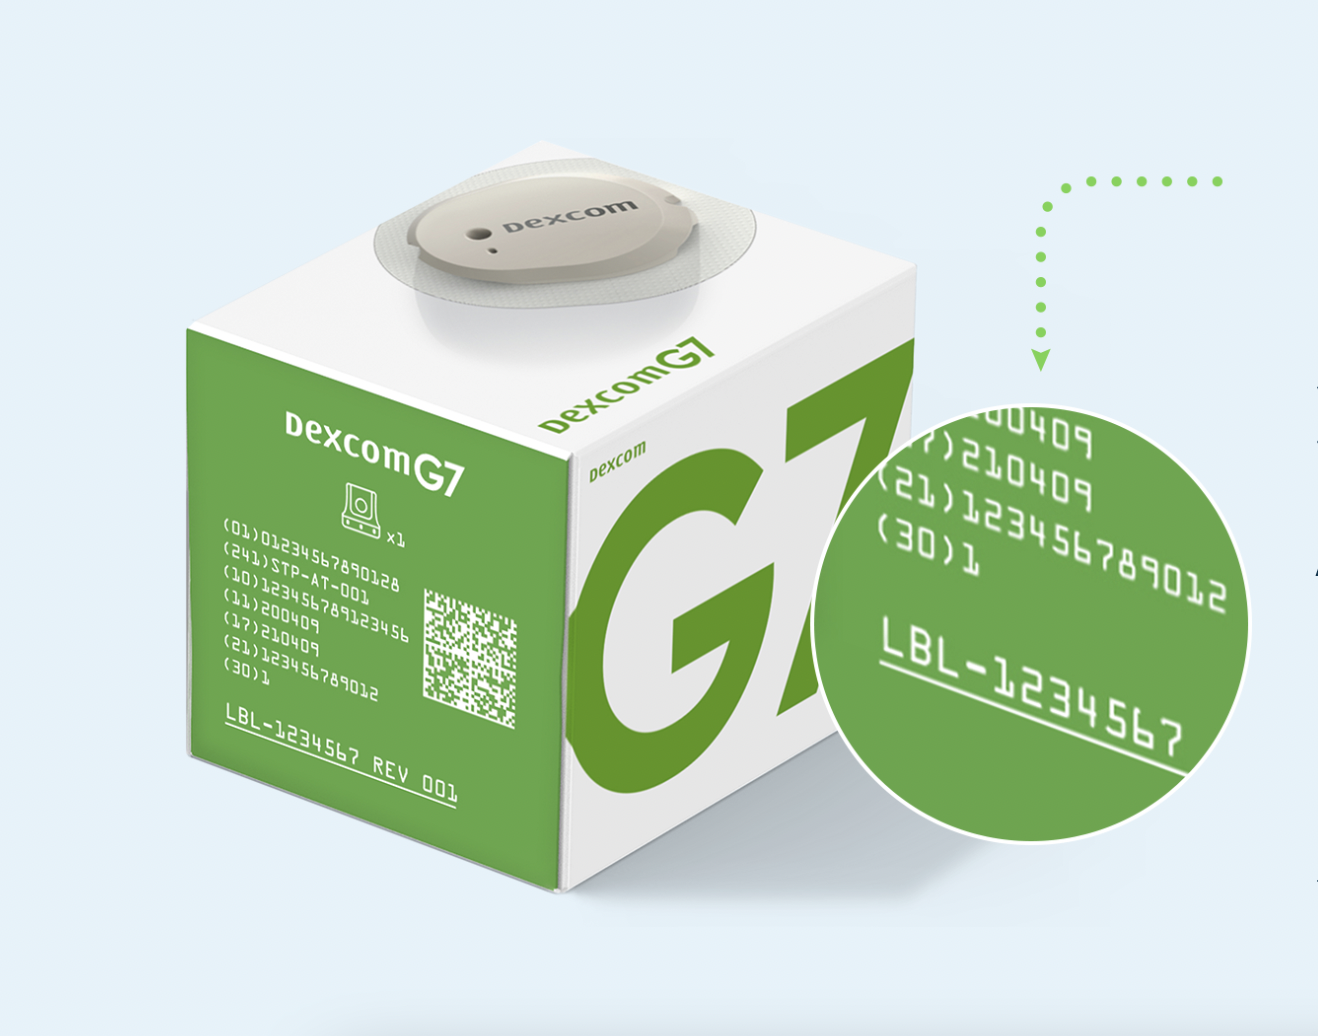 The Dexcom G7 packaging for integration with the t:slim X2 insulin pump